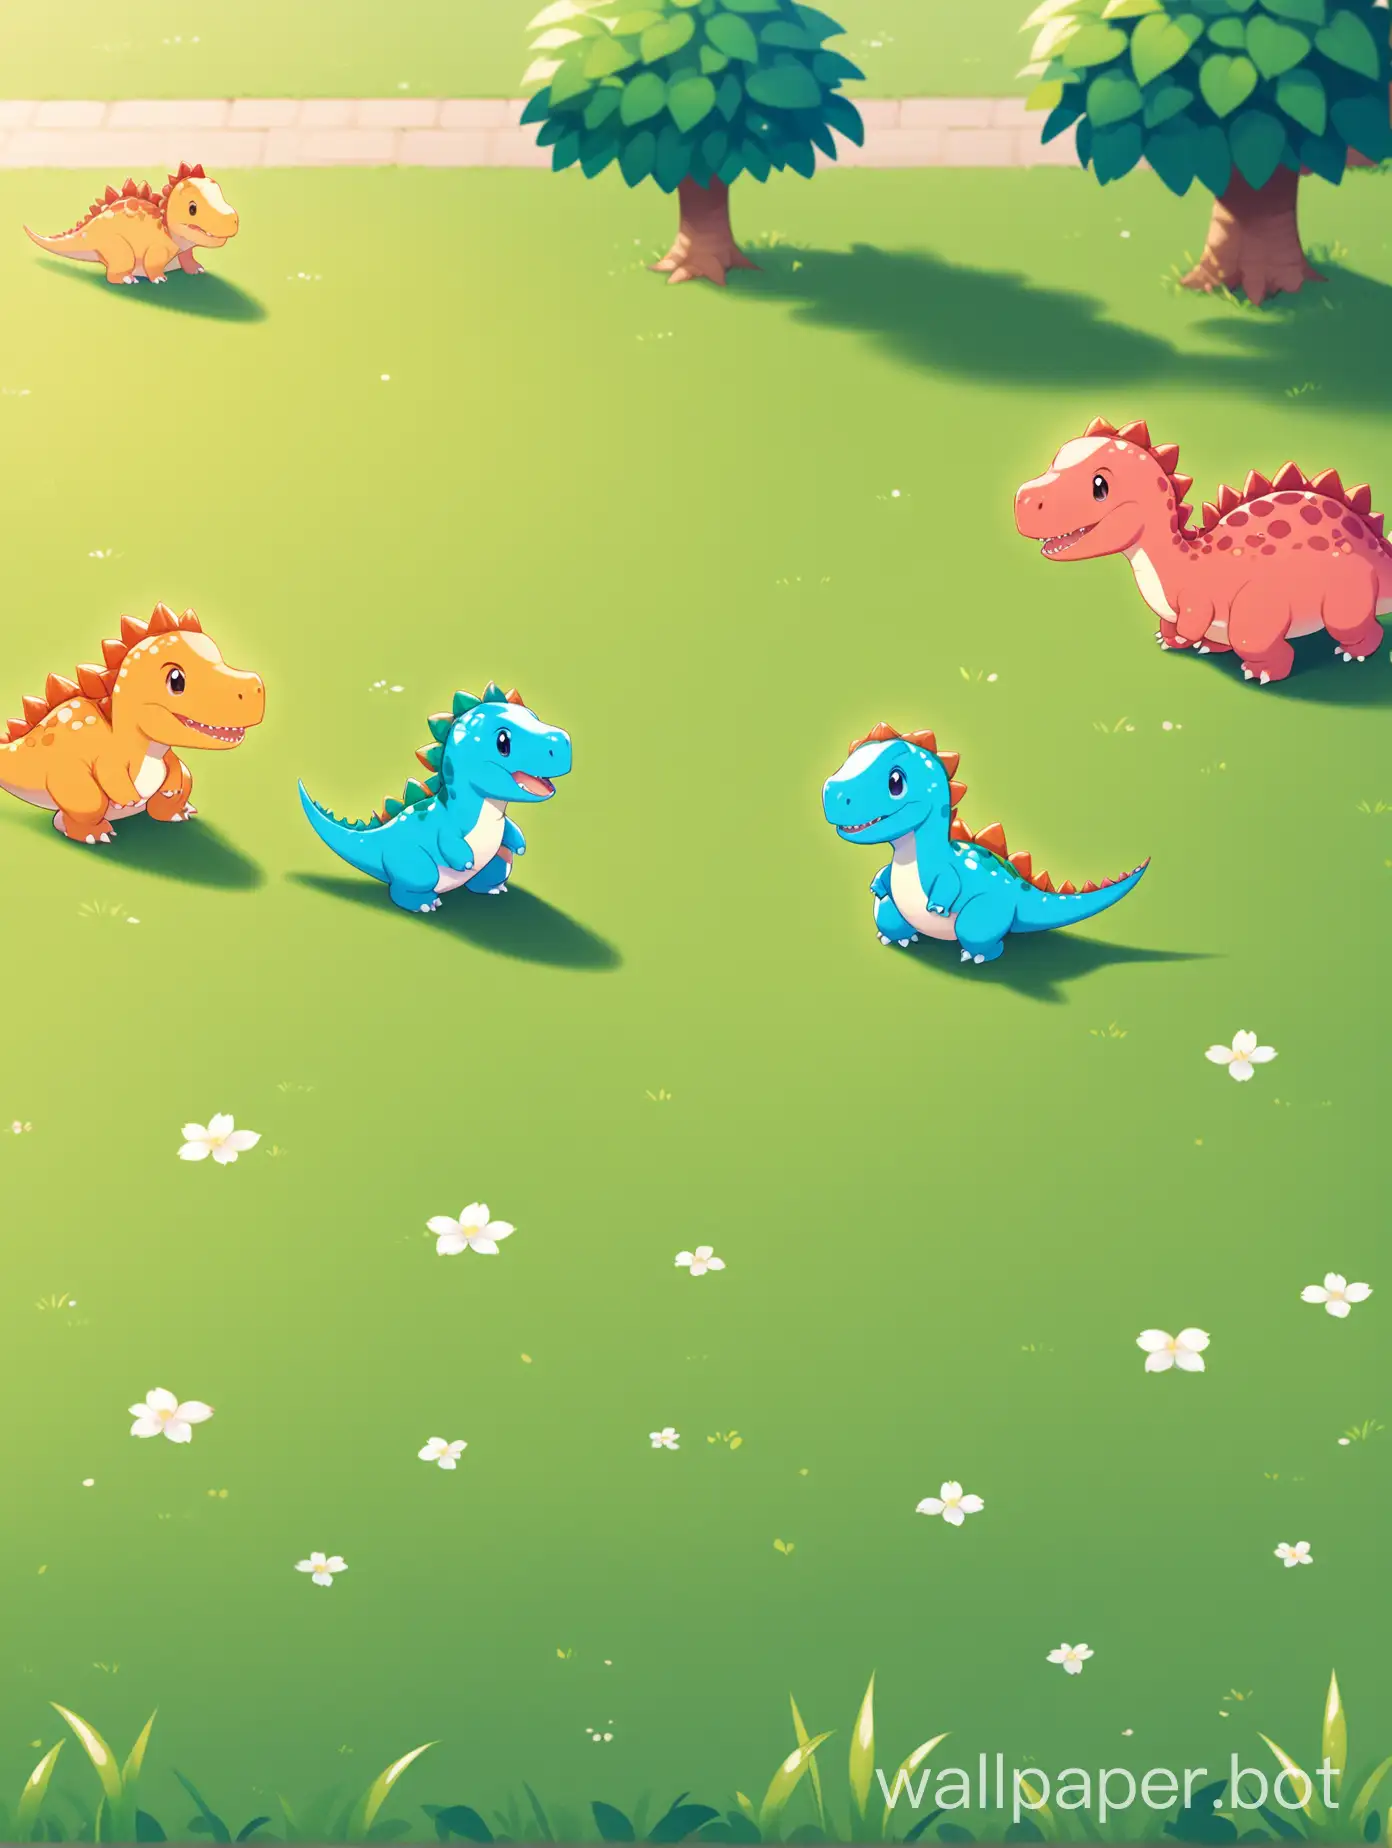 Two cute mini dinosaurs chatting with three students on the grass.